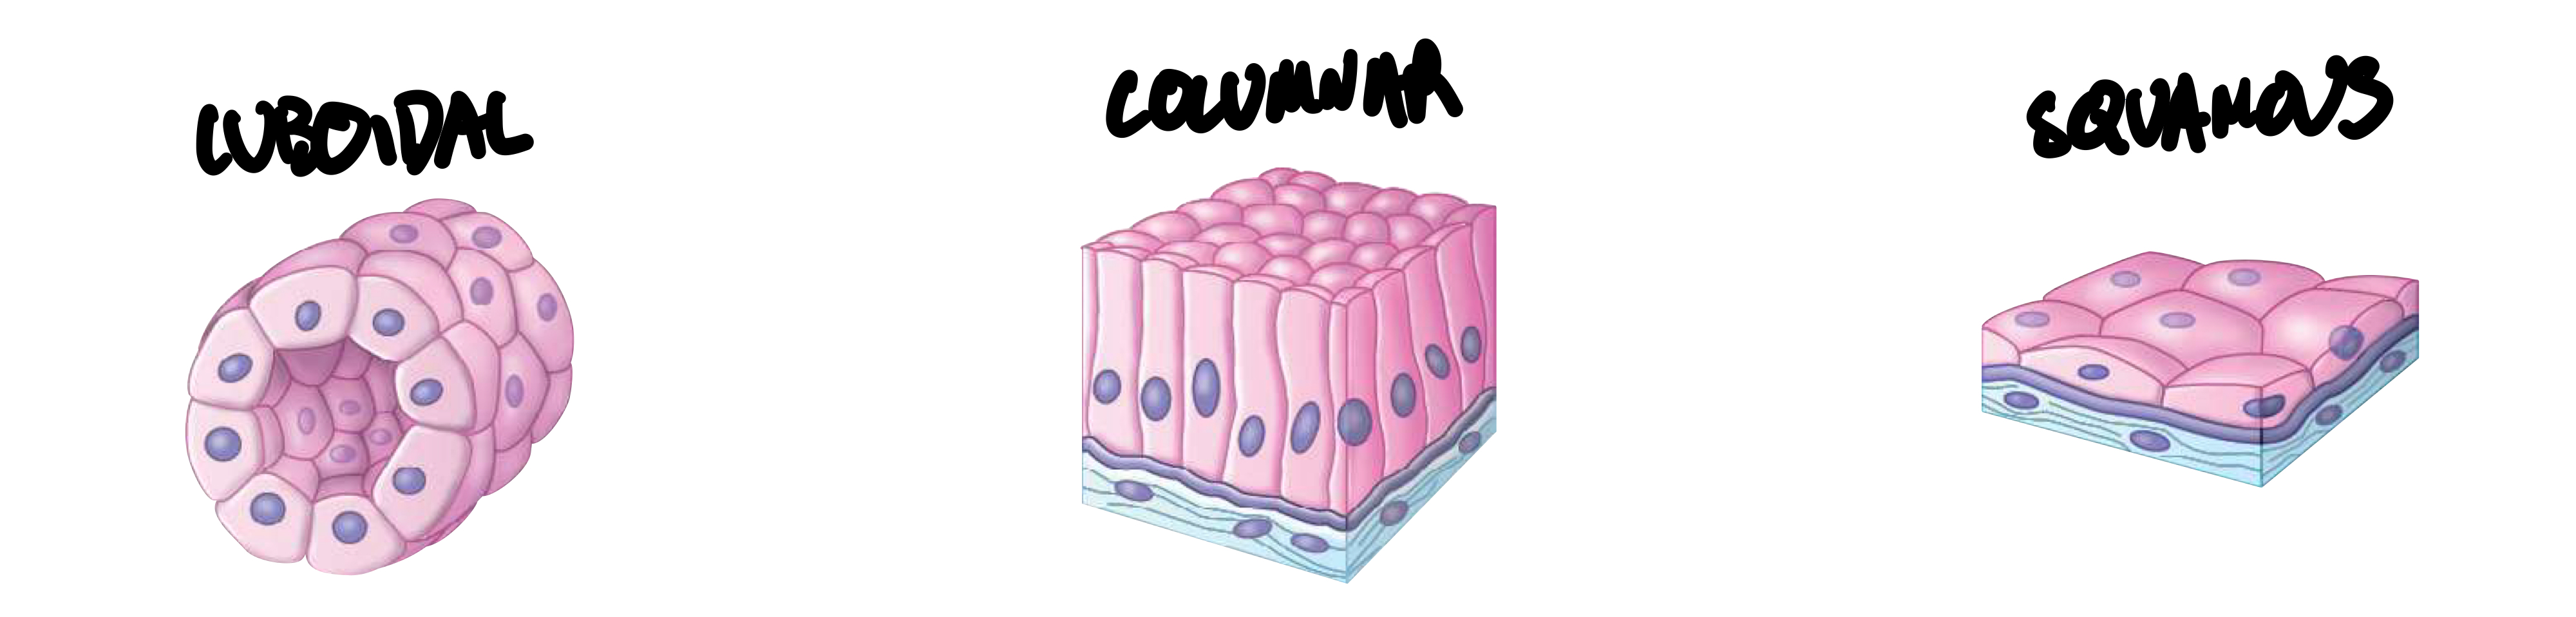 <ul><li><p>Squamous epithelium, which is flattened, having most contact for each cell with basement membrane out of all epithelia, specialized for diffusion.</p></li><li><p>Cuboidal epithelium, which is cube-shaped, specialized for absorption and secretion of intestine.</p></li><li><p>Columnar epithelium, which is elongated and column-shaped, specialized for sideways expansion when a cell is destroyed.</p></li></ul>